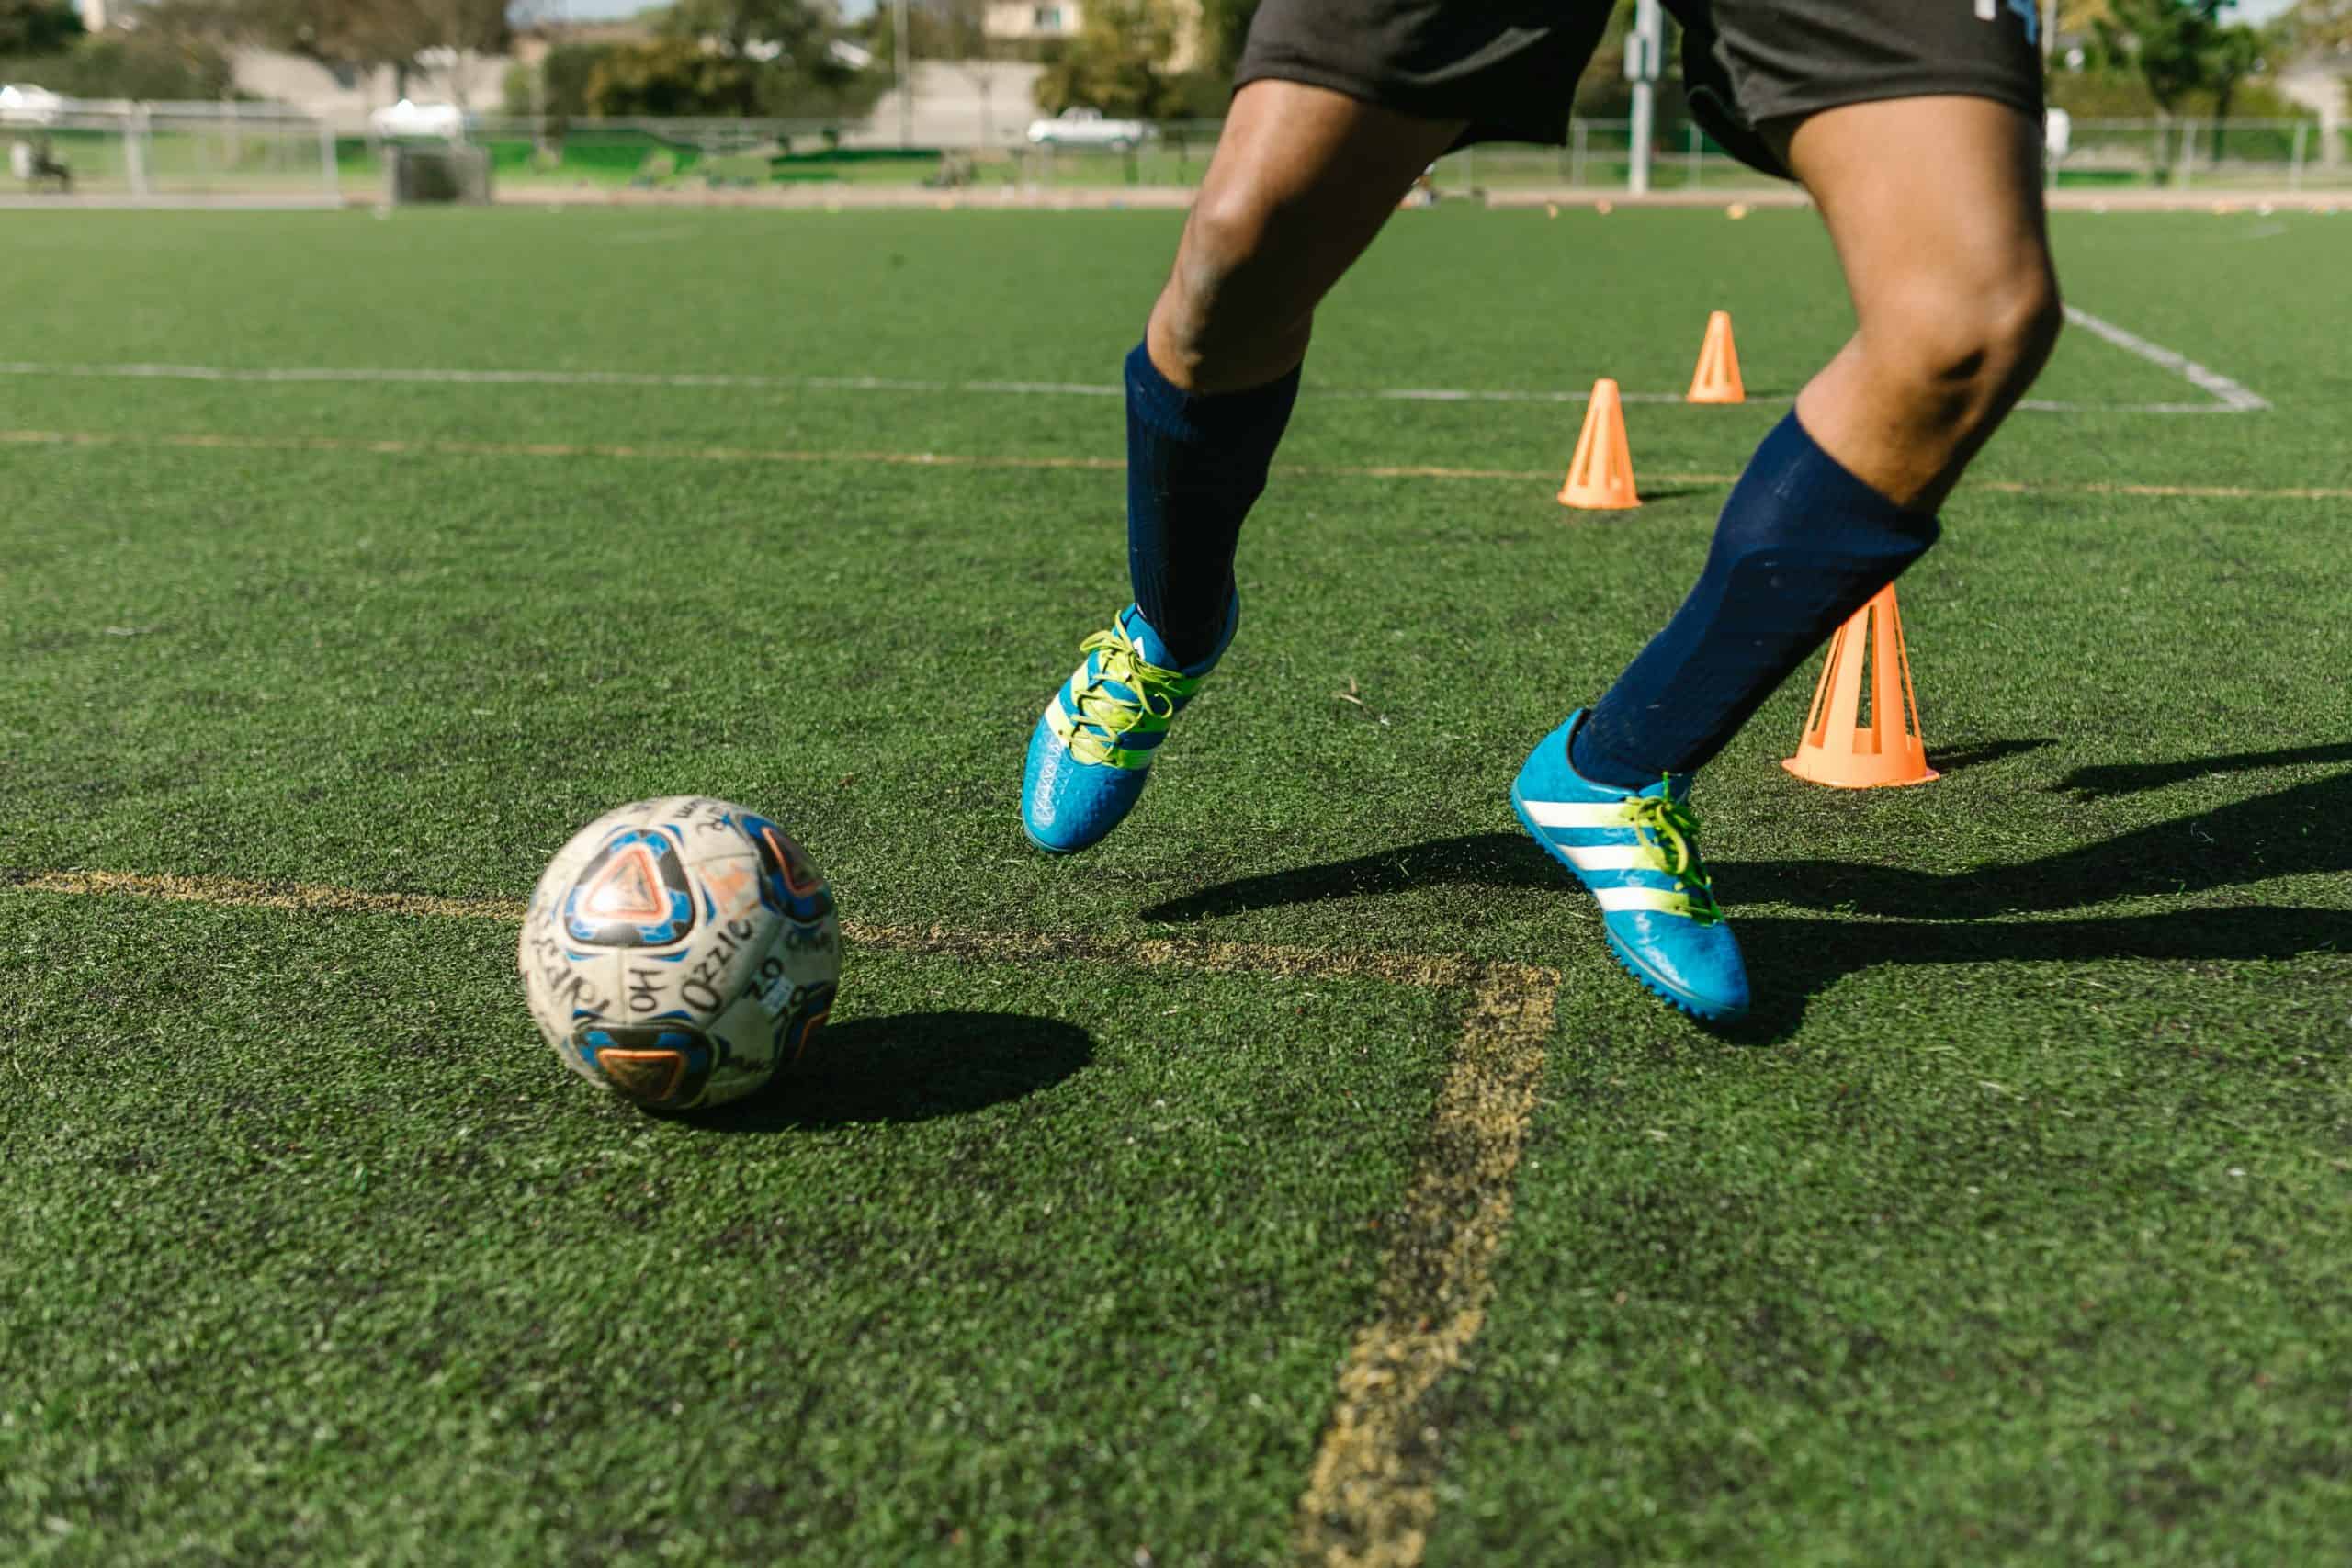 Why is individual soccer training so important?